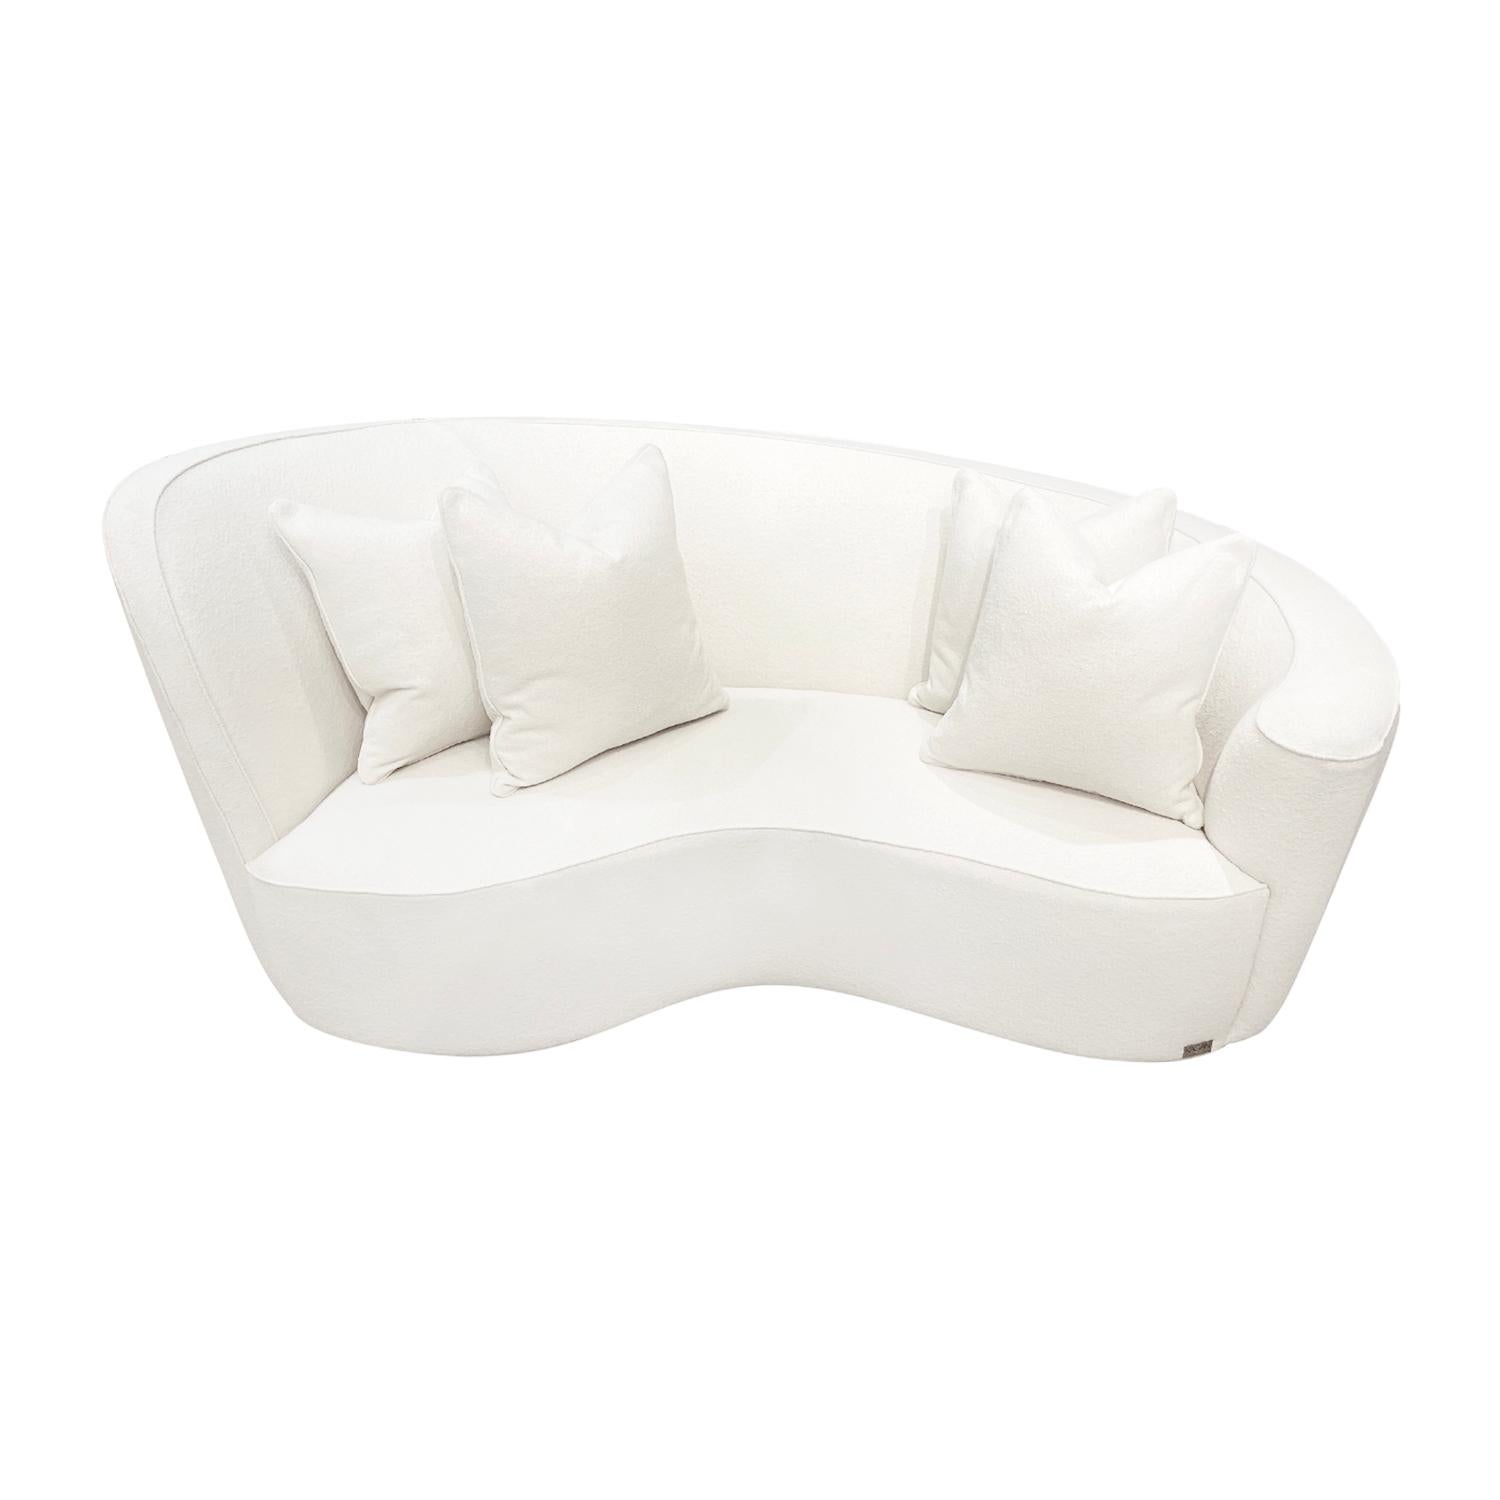 A vintage Mid-Century modern American four seater sofa with four pillows, designed by Vladimir Kagan in good condition. The high seat backrest of the settee, canapé curves seamlessly into a wide and tall armrest. Newly upholstered in a white bouclé